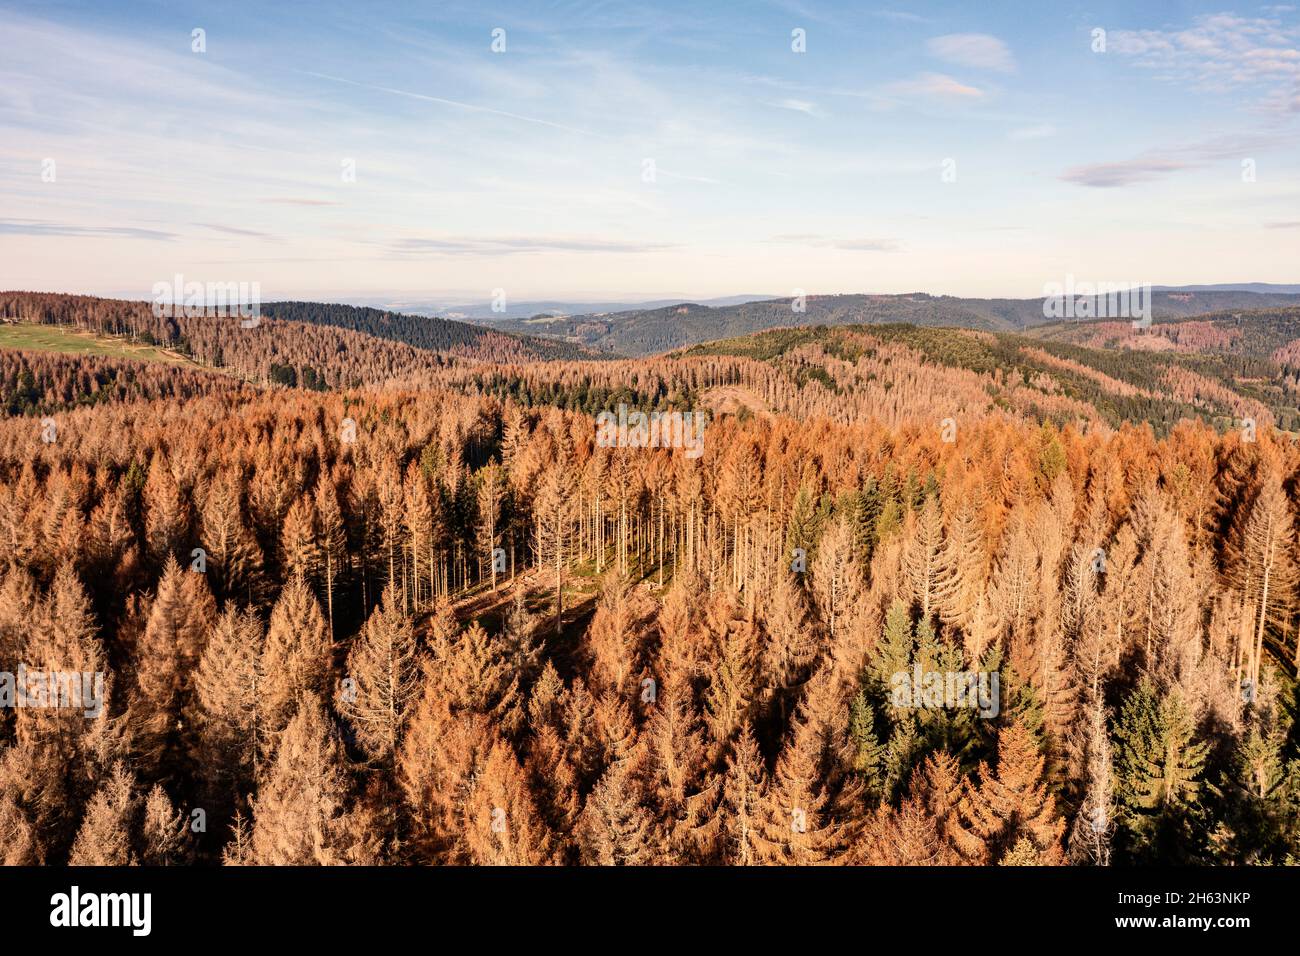 germany,thuringia,masserberg,heubach,mountains,valleys,large areas of dead trees,rennsteig environment,overview,aerial view,morning light Stock Photo